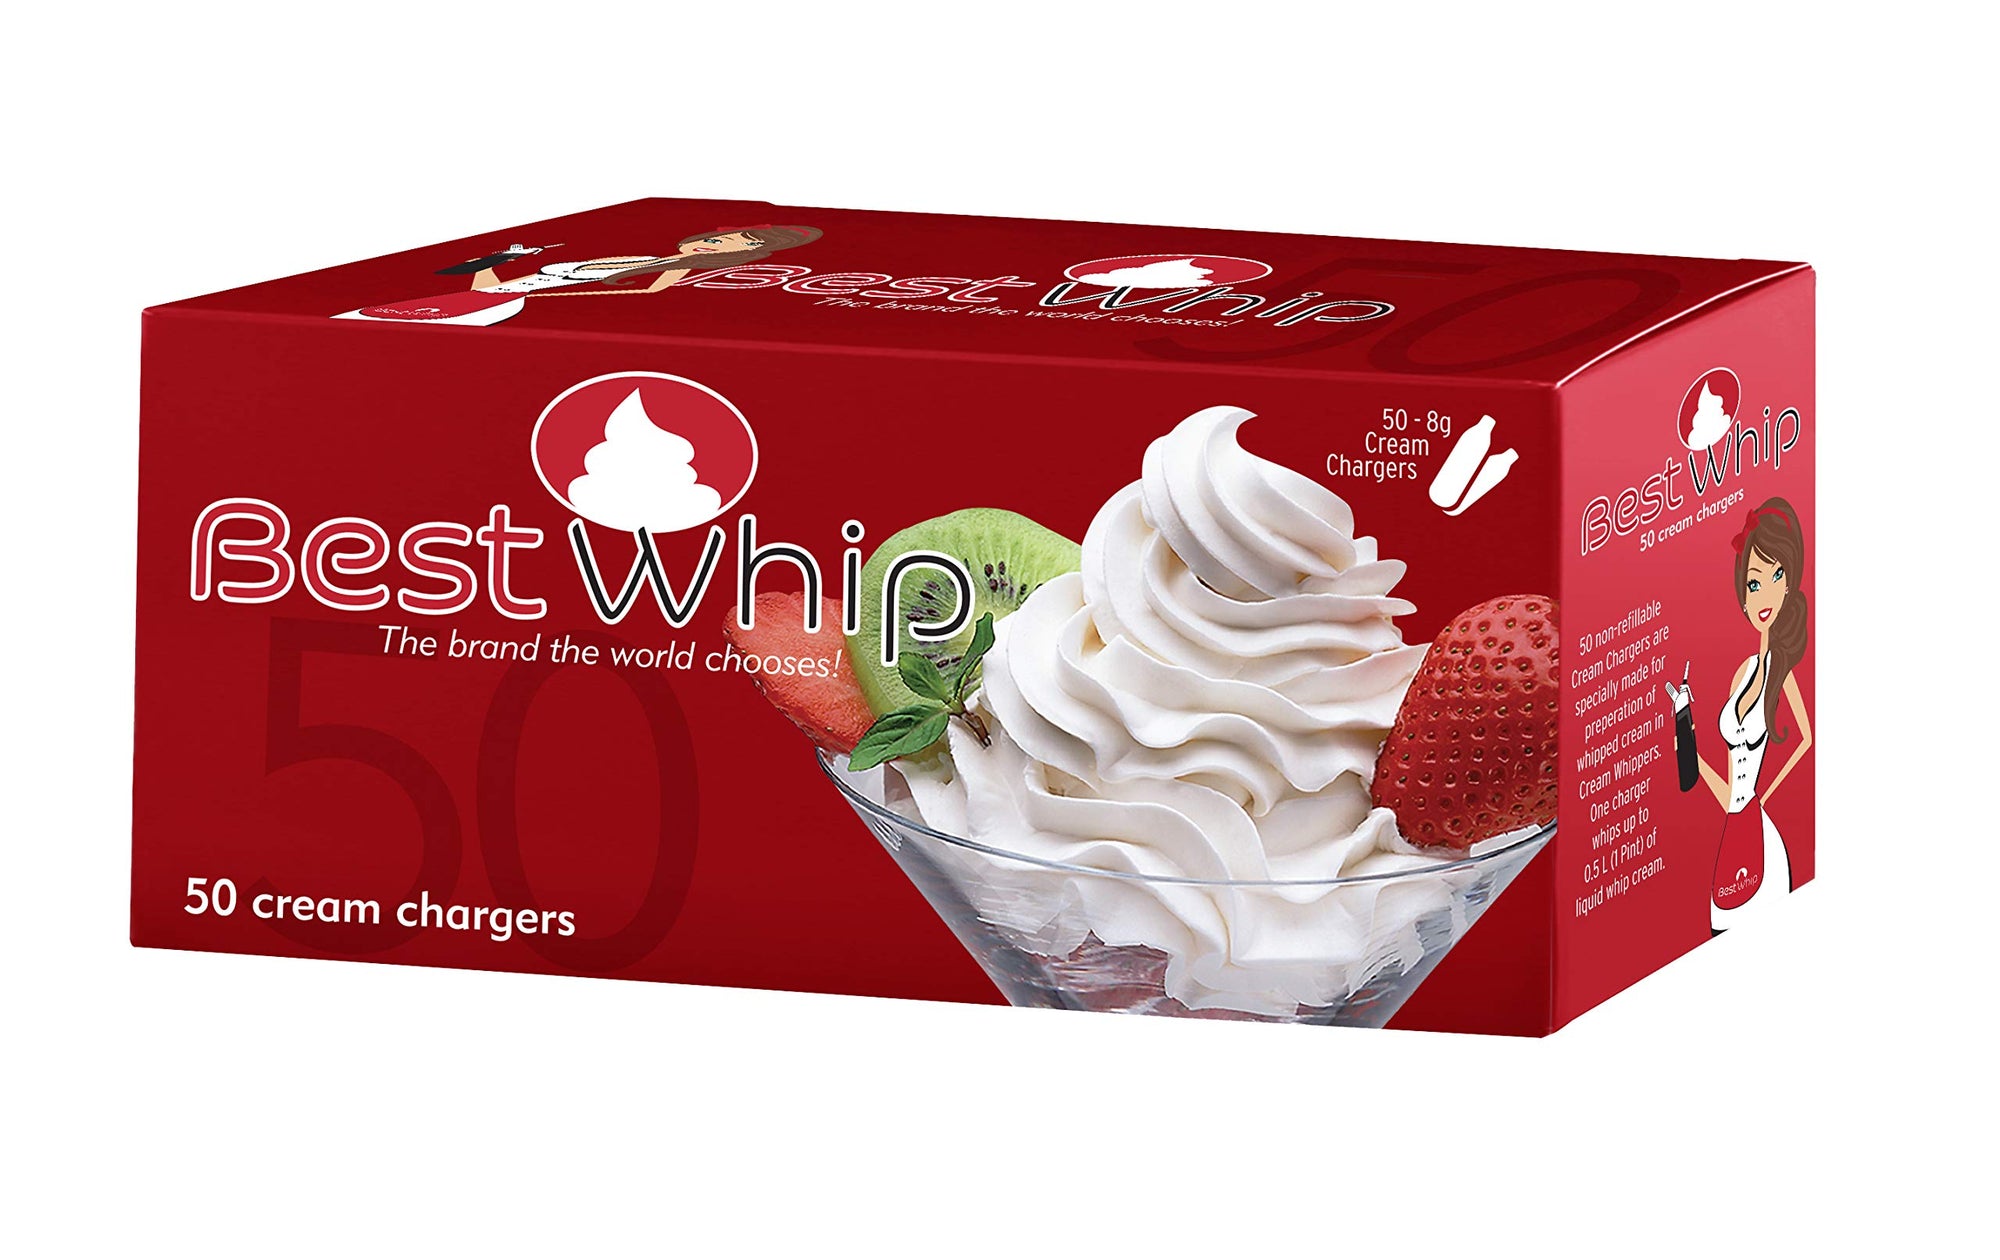 Best Whip Cream Chargers Original 50ct